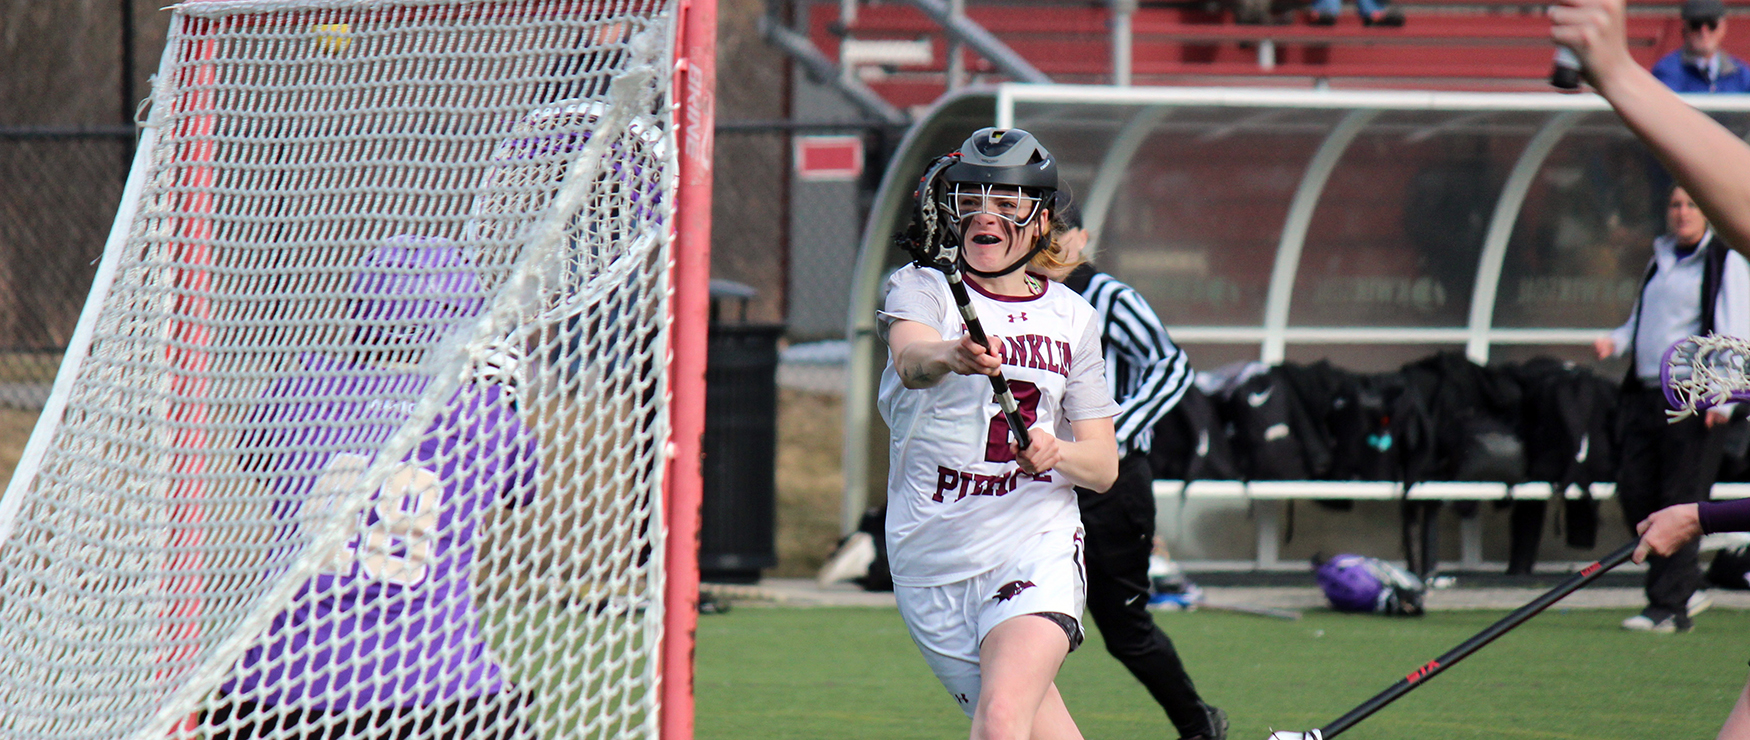 Caitlin Sweeney Named to All-NE10 Third Team, Women’s Lacrosse Has Three Honored by Conference